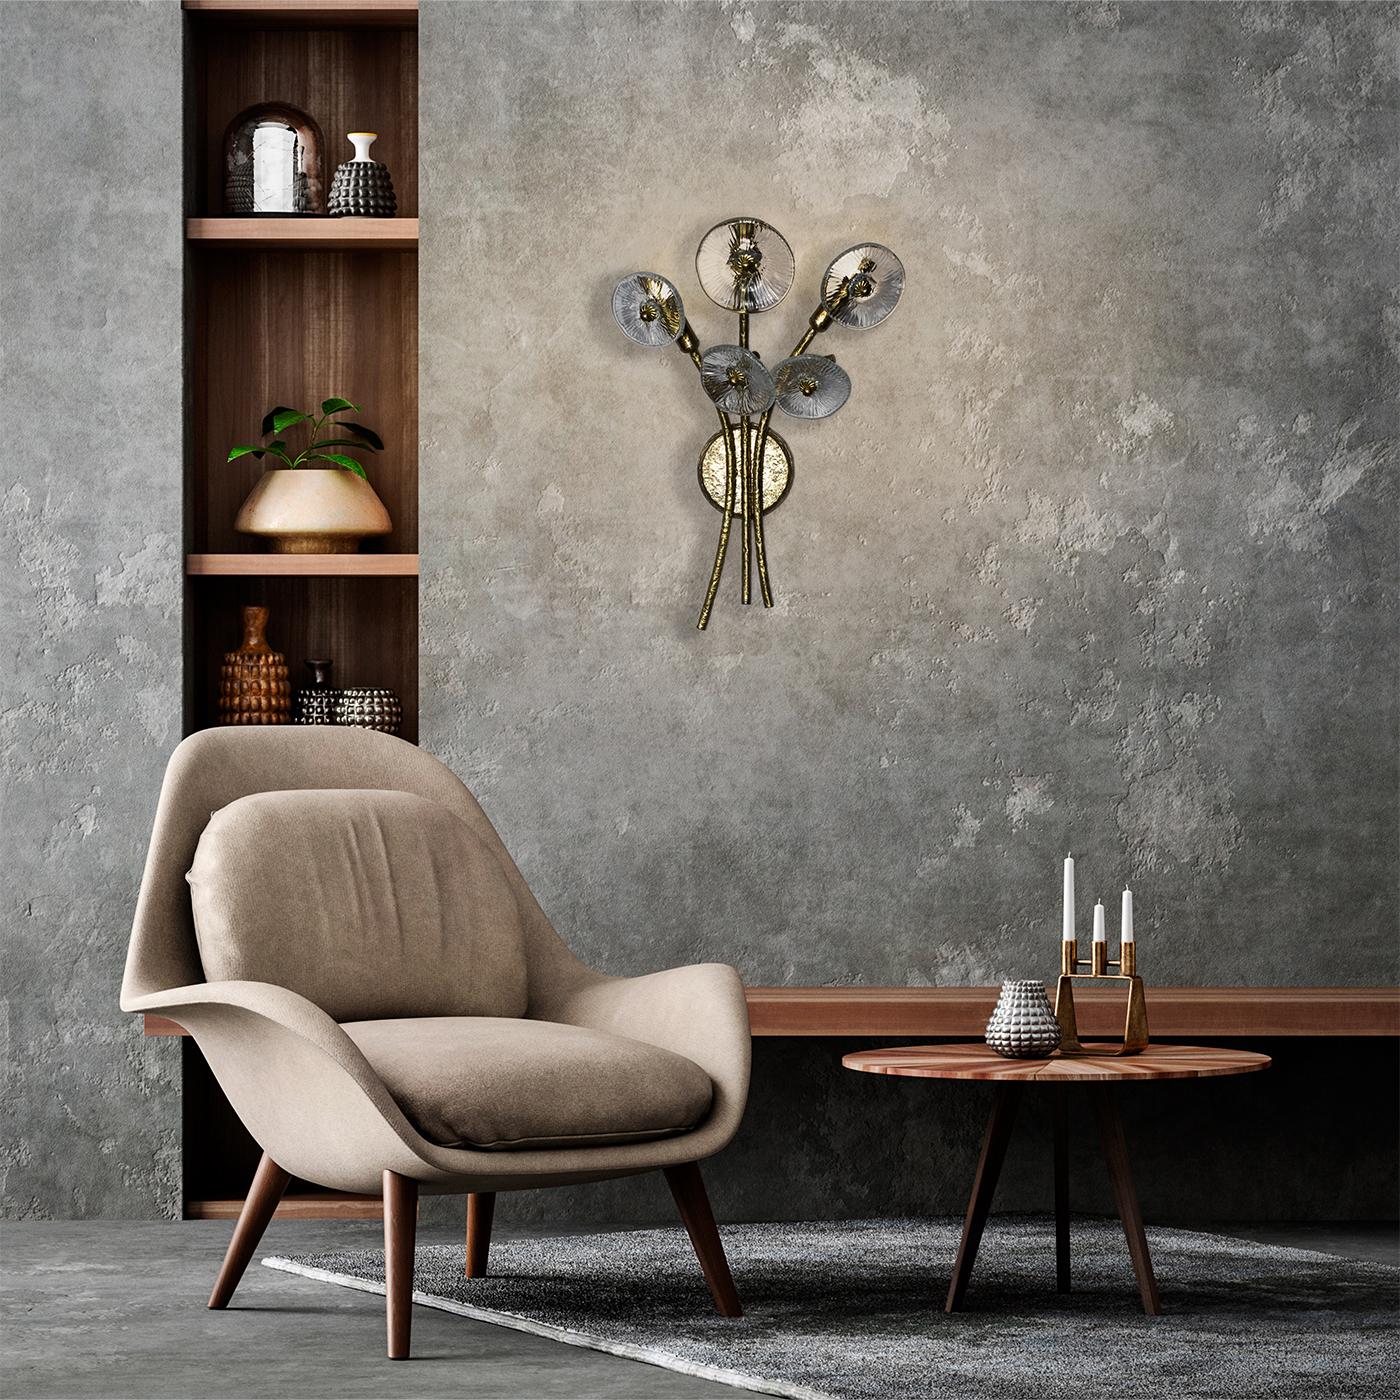 A celebration of nature and craftsmanship, this refined wall lamp draws inspiration from a bundle of blossoming flowers. Minutely mouth-blown, the bud-like glass shades top elegant curved arms in hammered brass that recreate graceful stems. Please